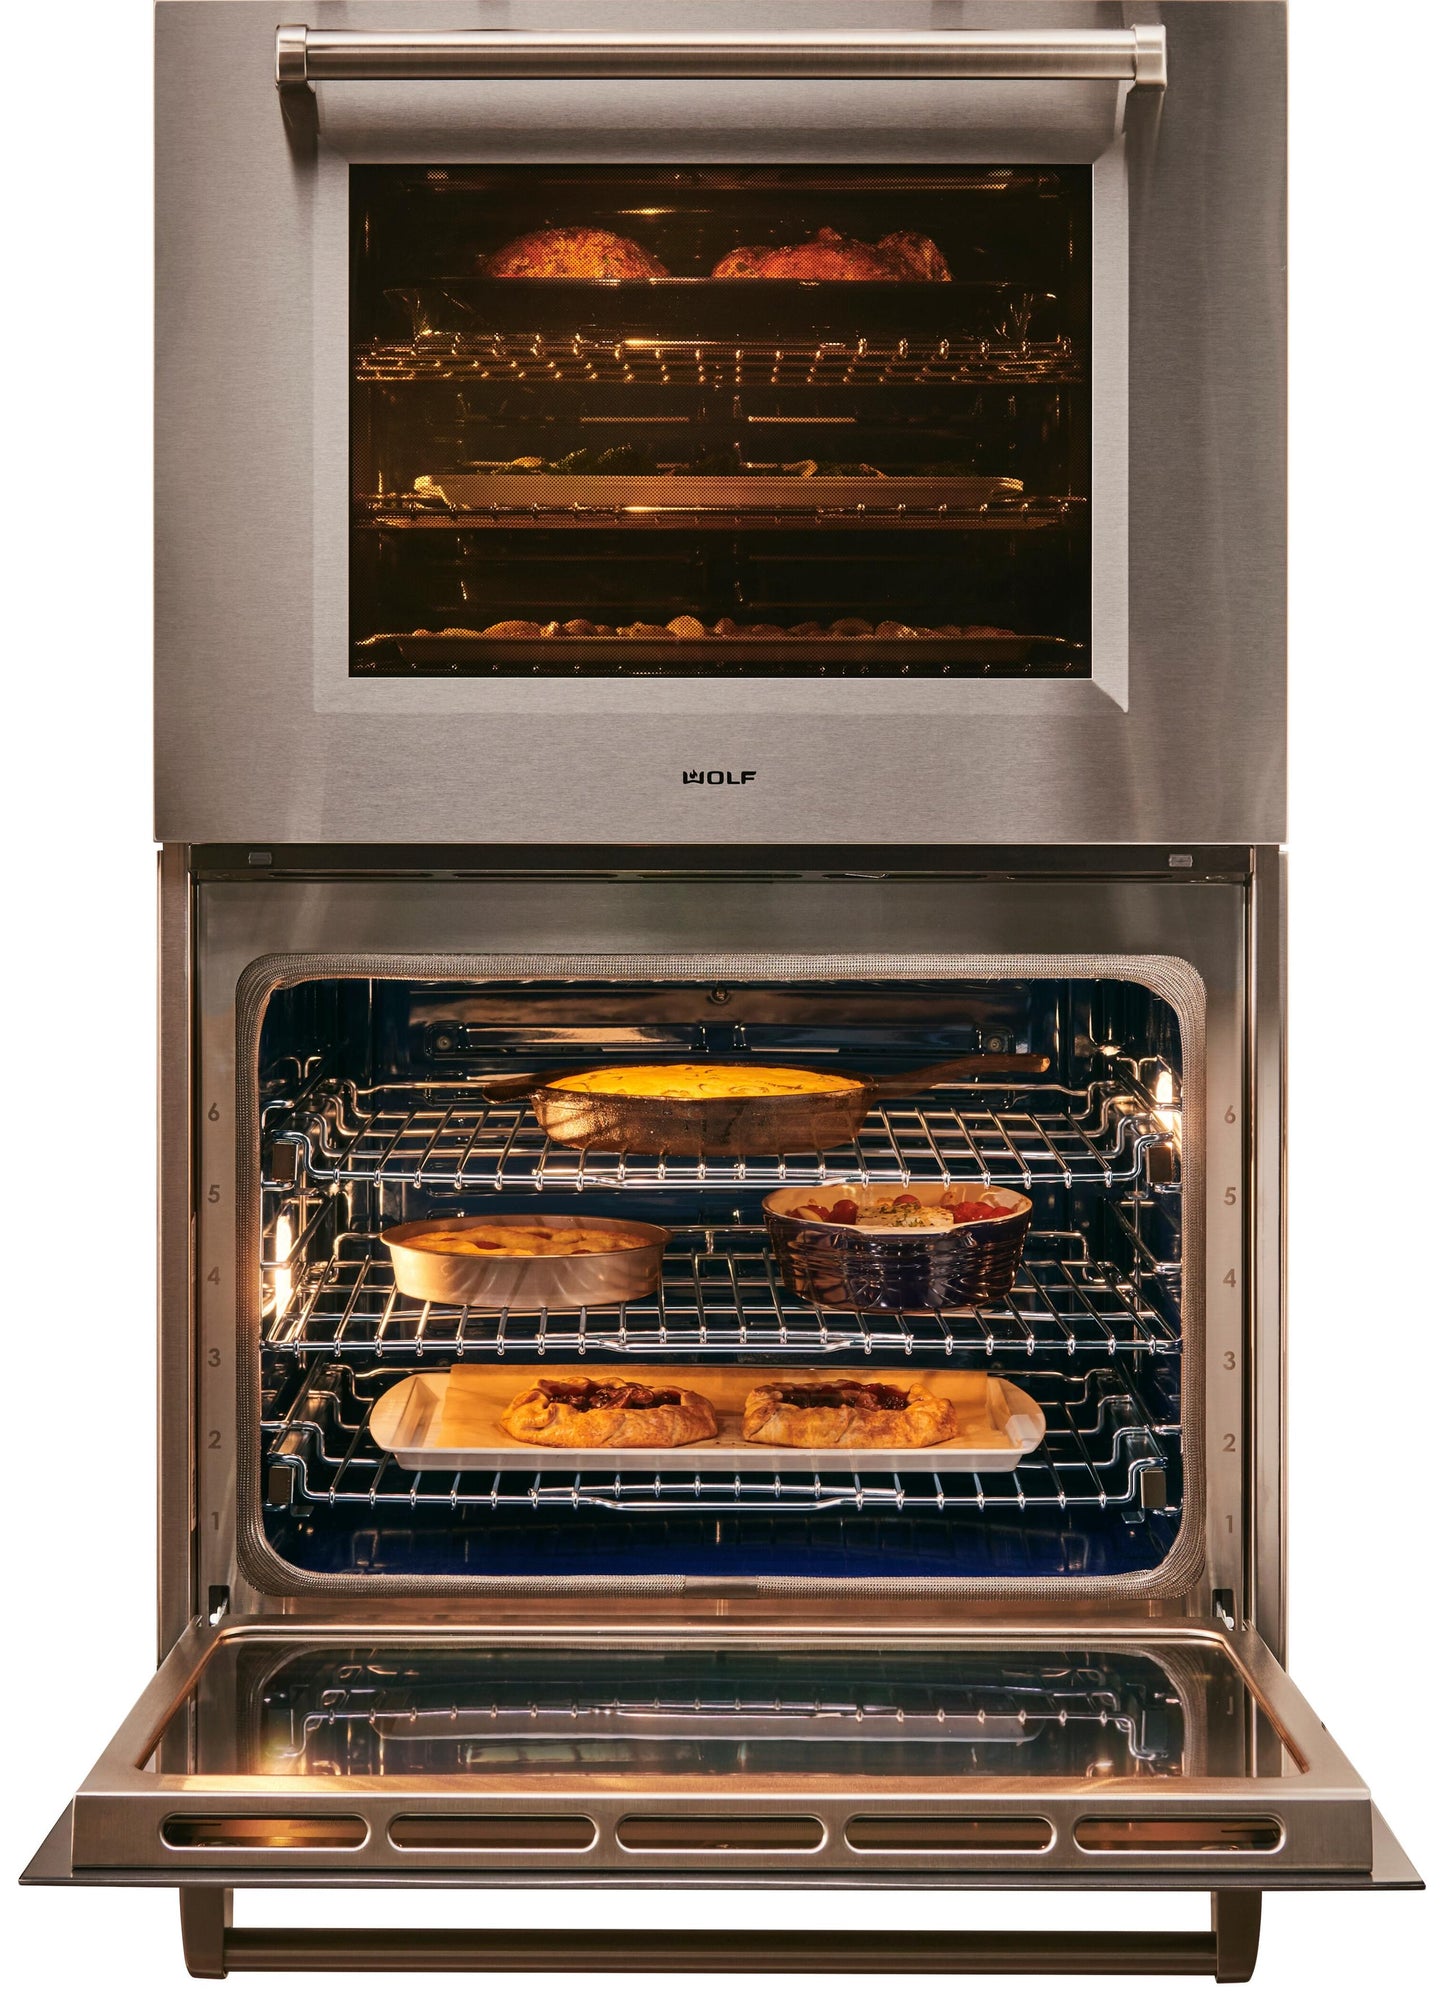 Wolf DO3050CMB 30" M Series Contemporary Built-In Double Oven